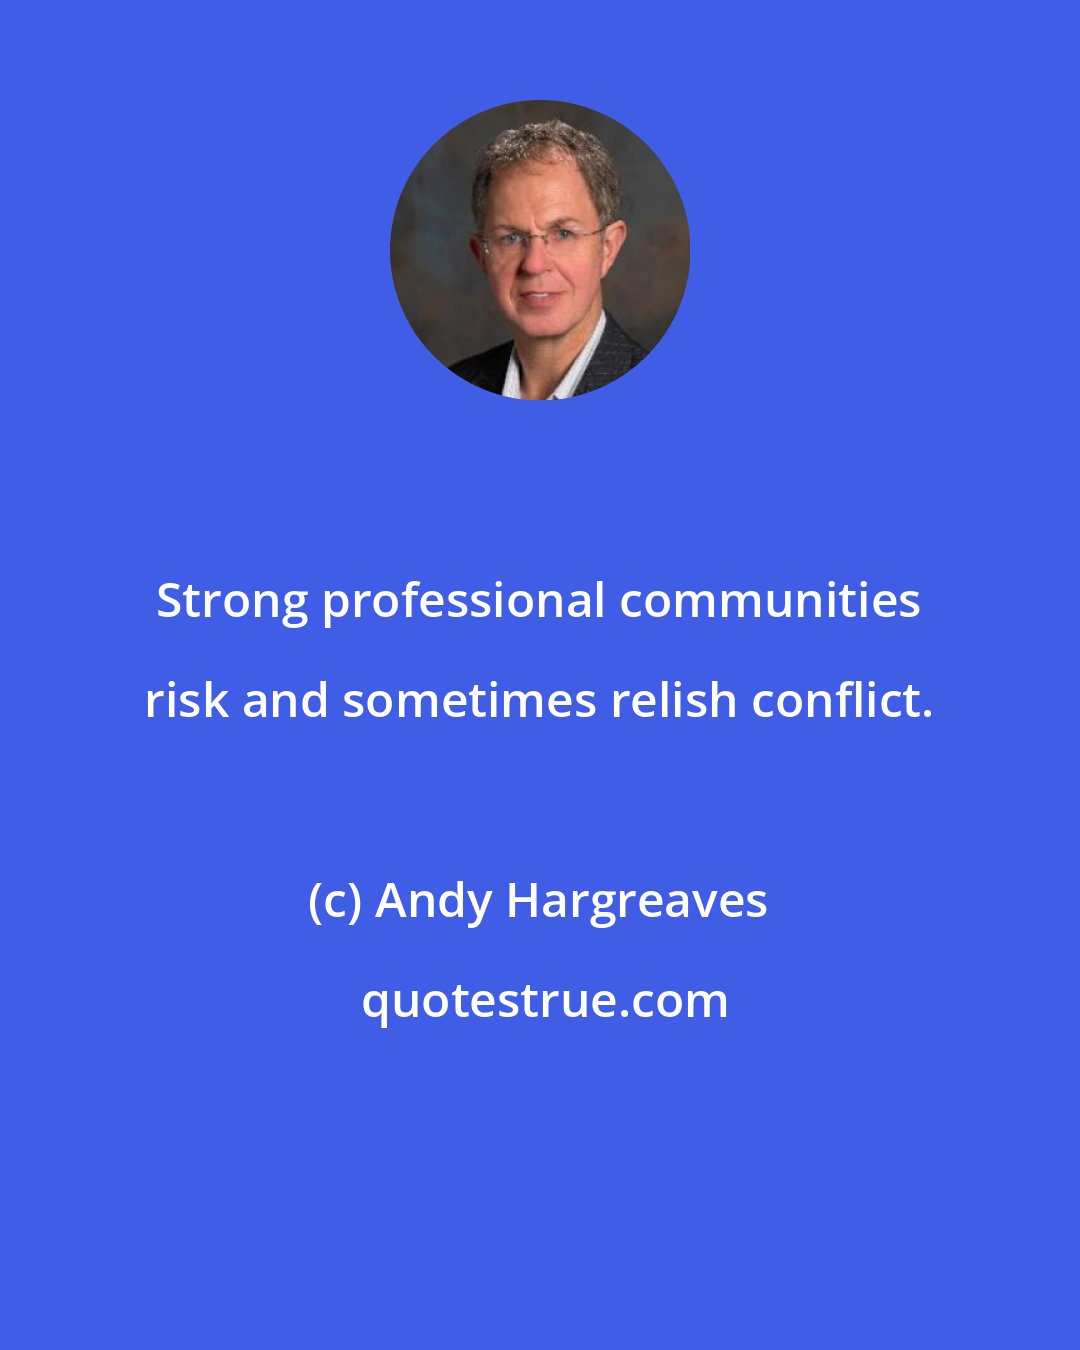 Andy Hargreaves: Strong professional communities risk and sometimes relish conflict.